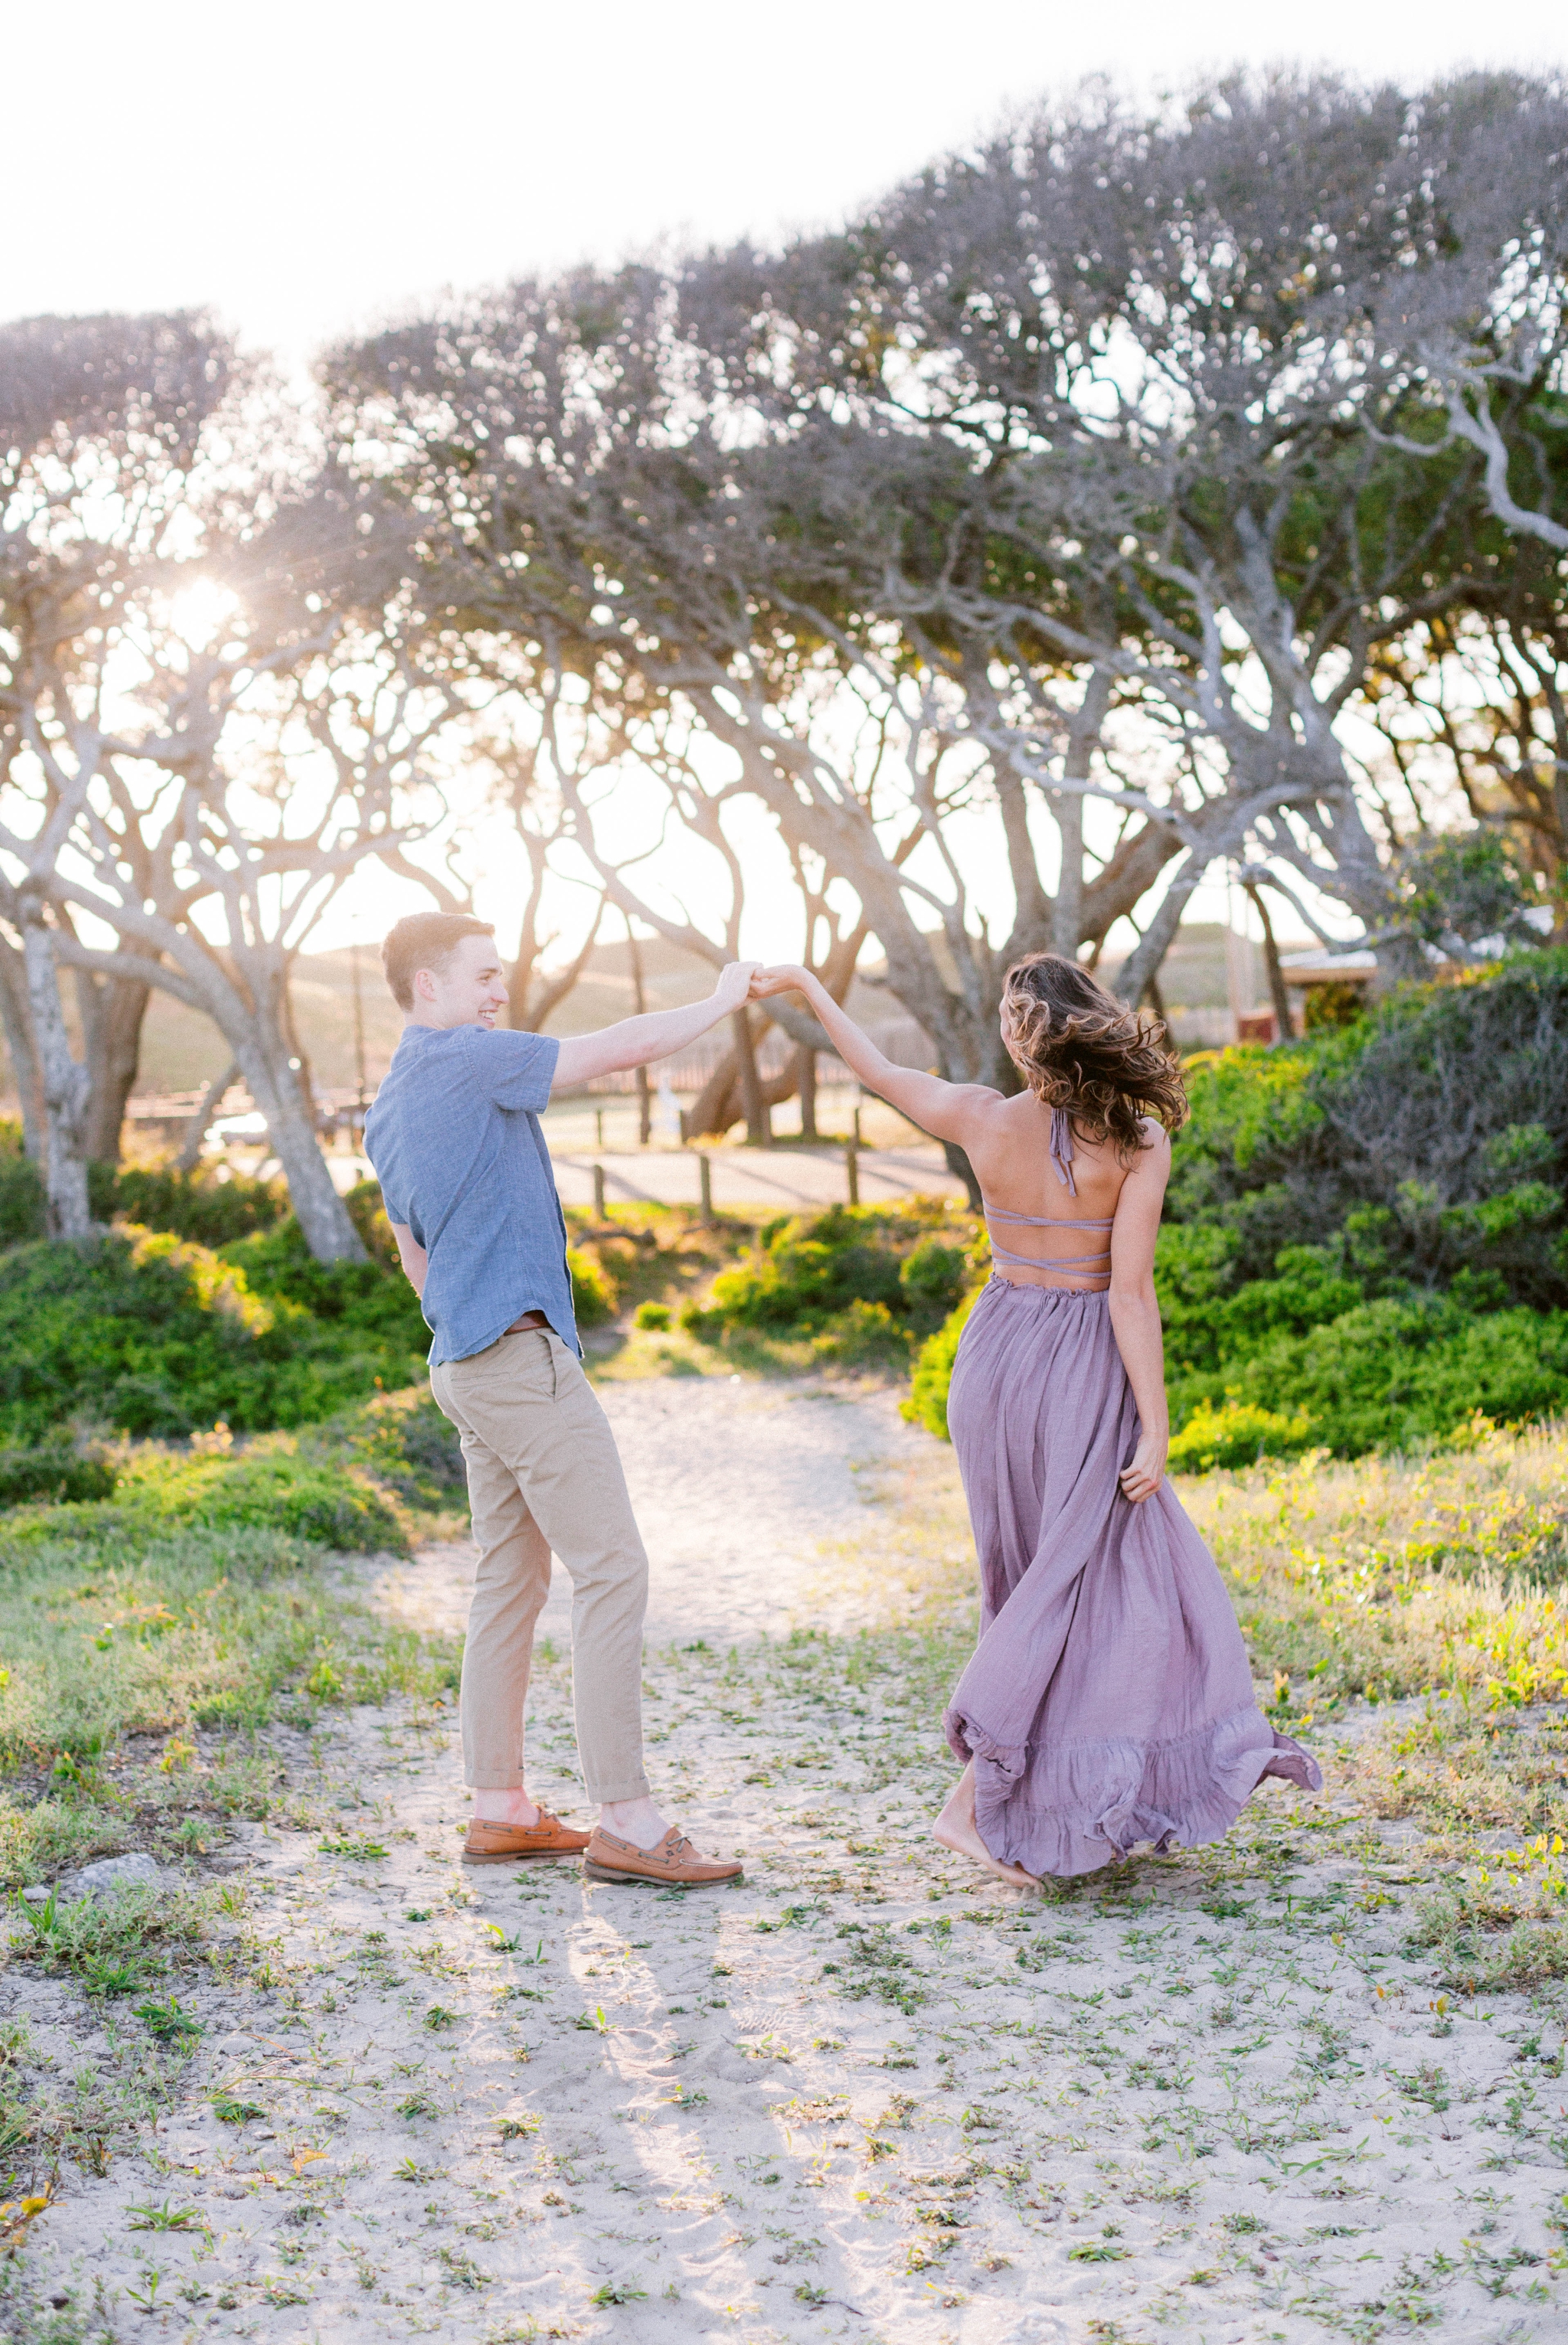  Guy dancing with girl in front of live oak trees with the sunset behind them - Woman is in a flowy pastel maxi dress - outdoor golden light session - engagement photographer in honolulu, oahu, hawaii - johanna dye photography 